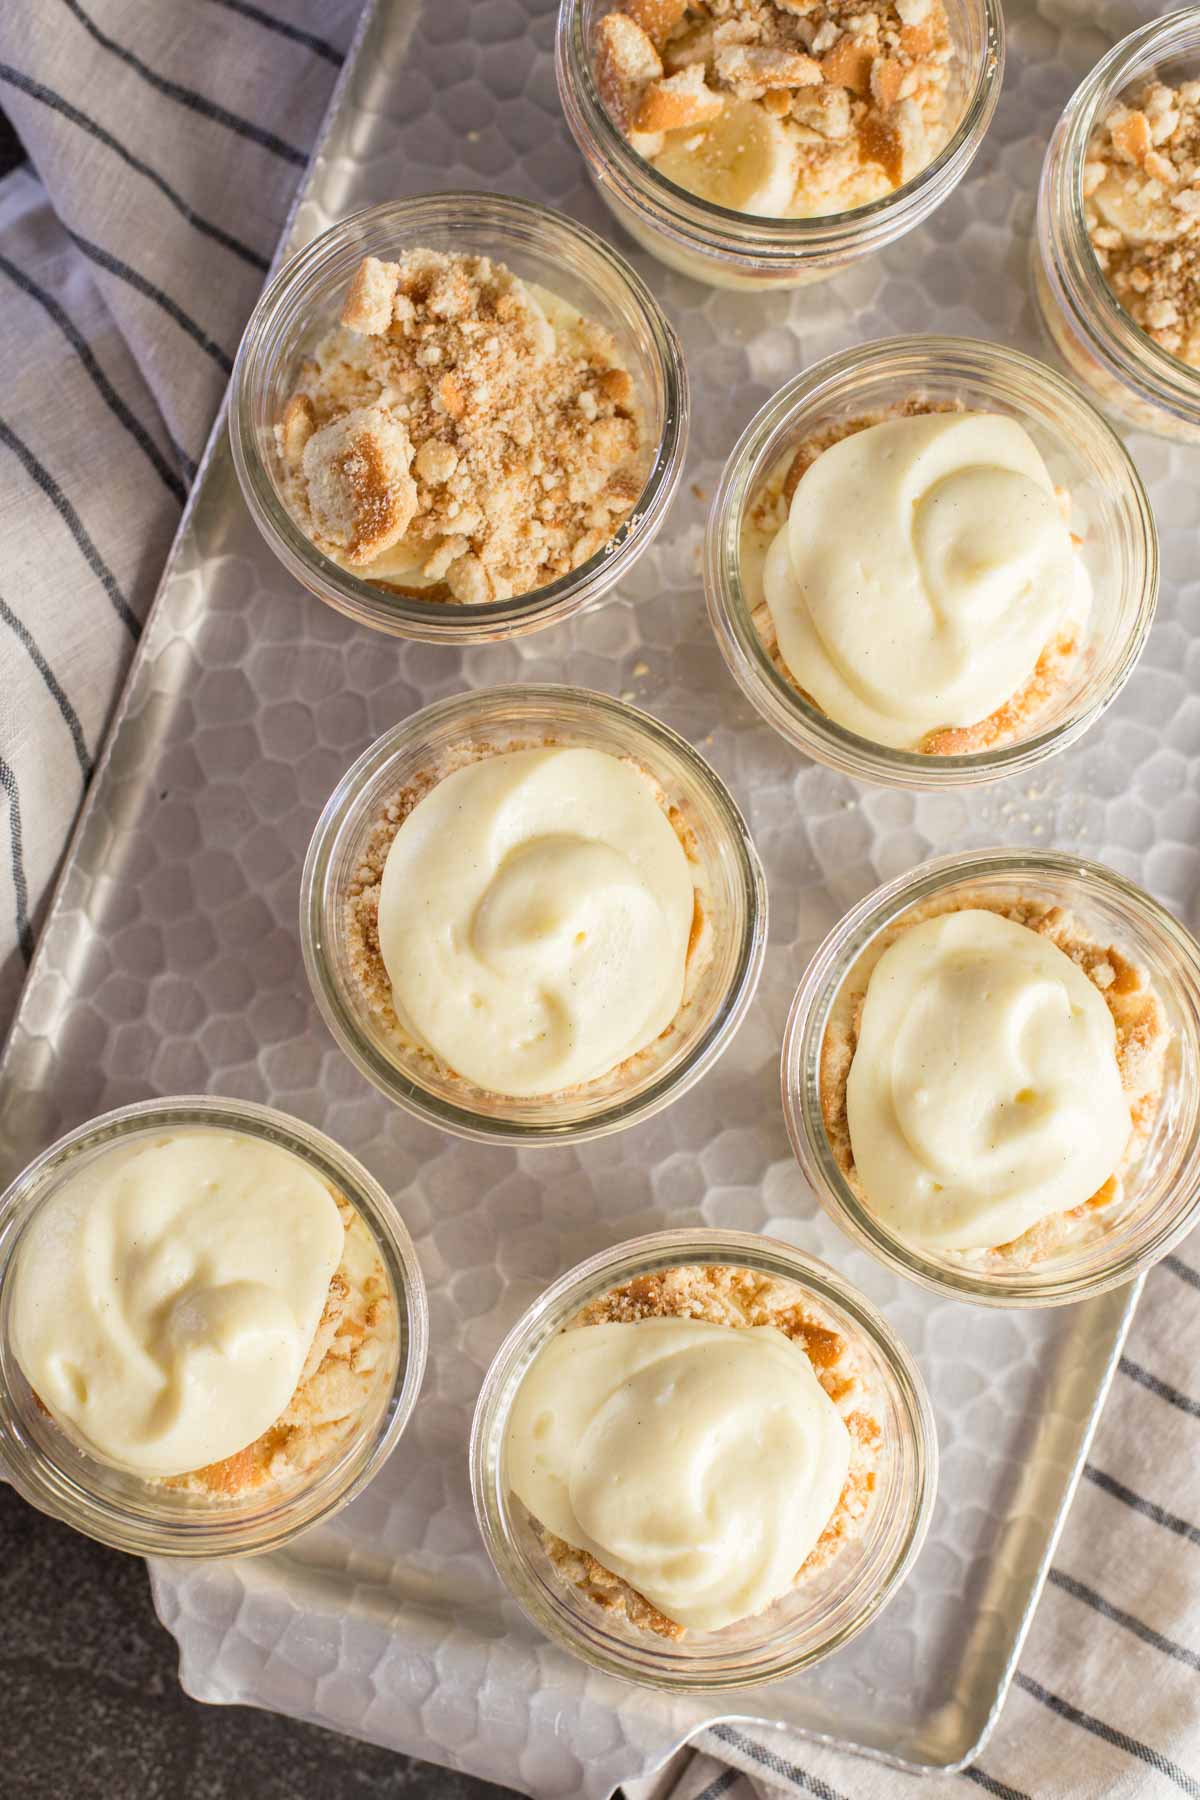 In process shot from above showing layers of banana pudding cups